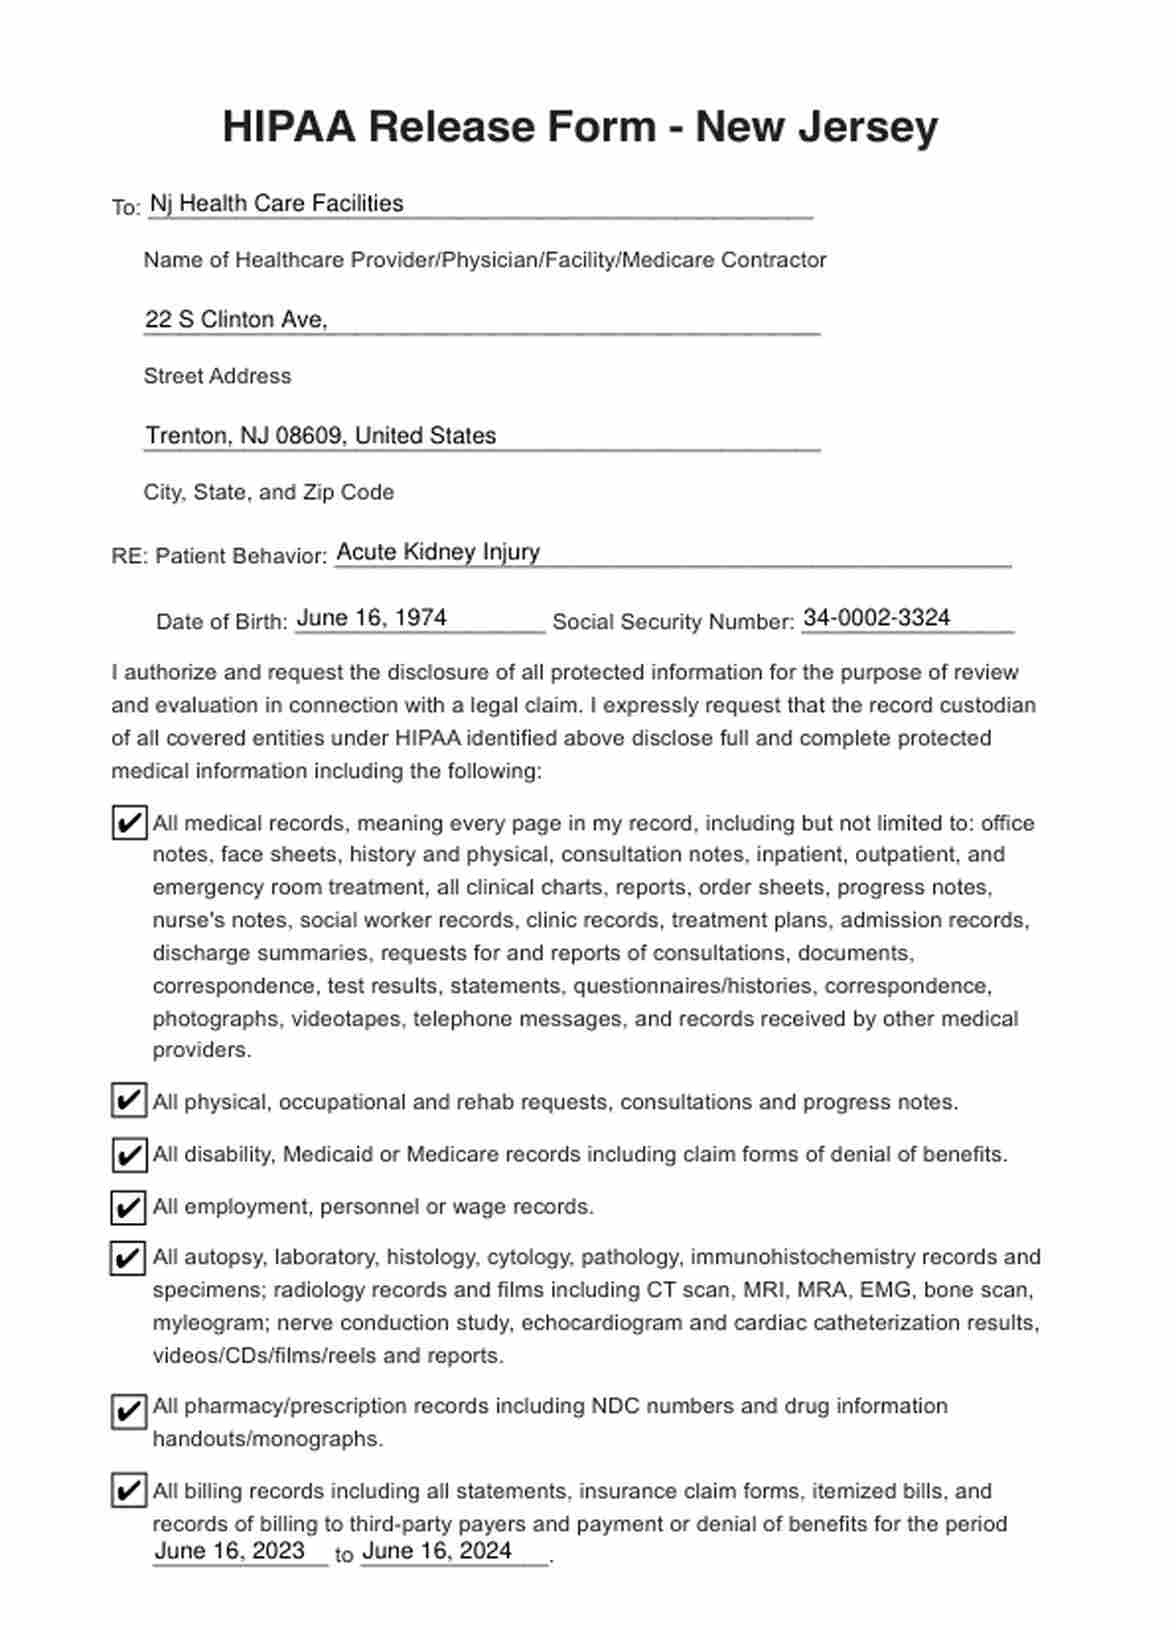 HIPAA Release Form New Jersey PDF Example